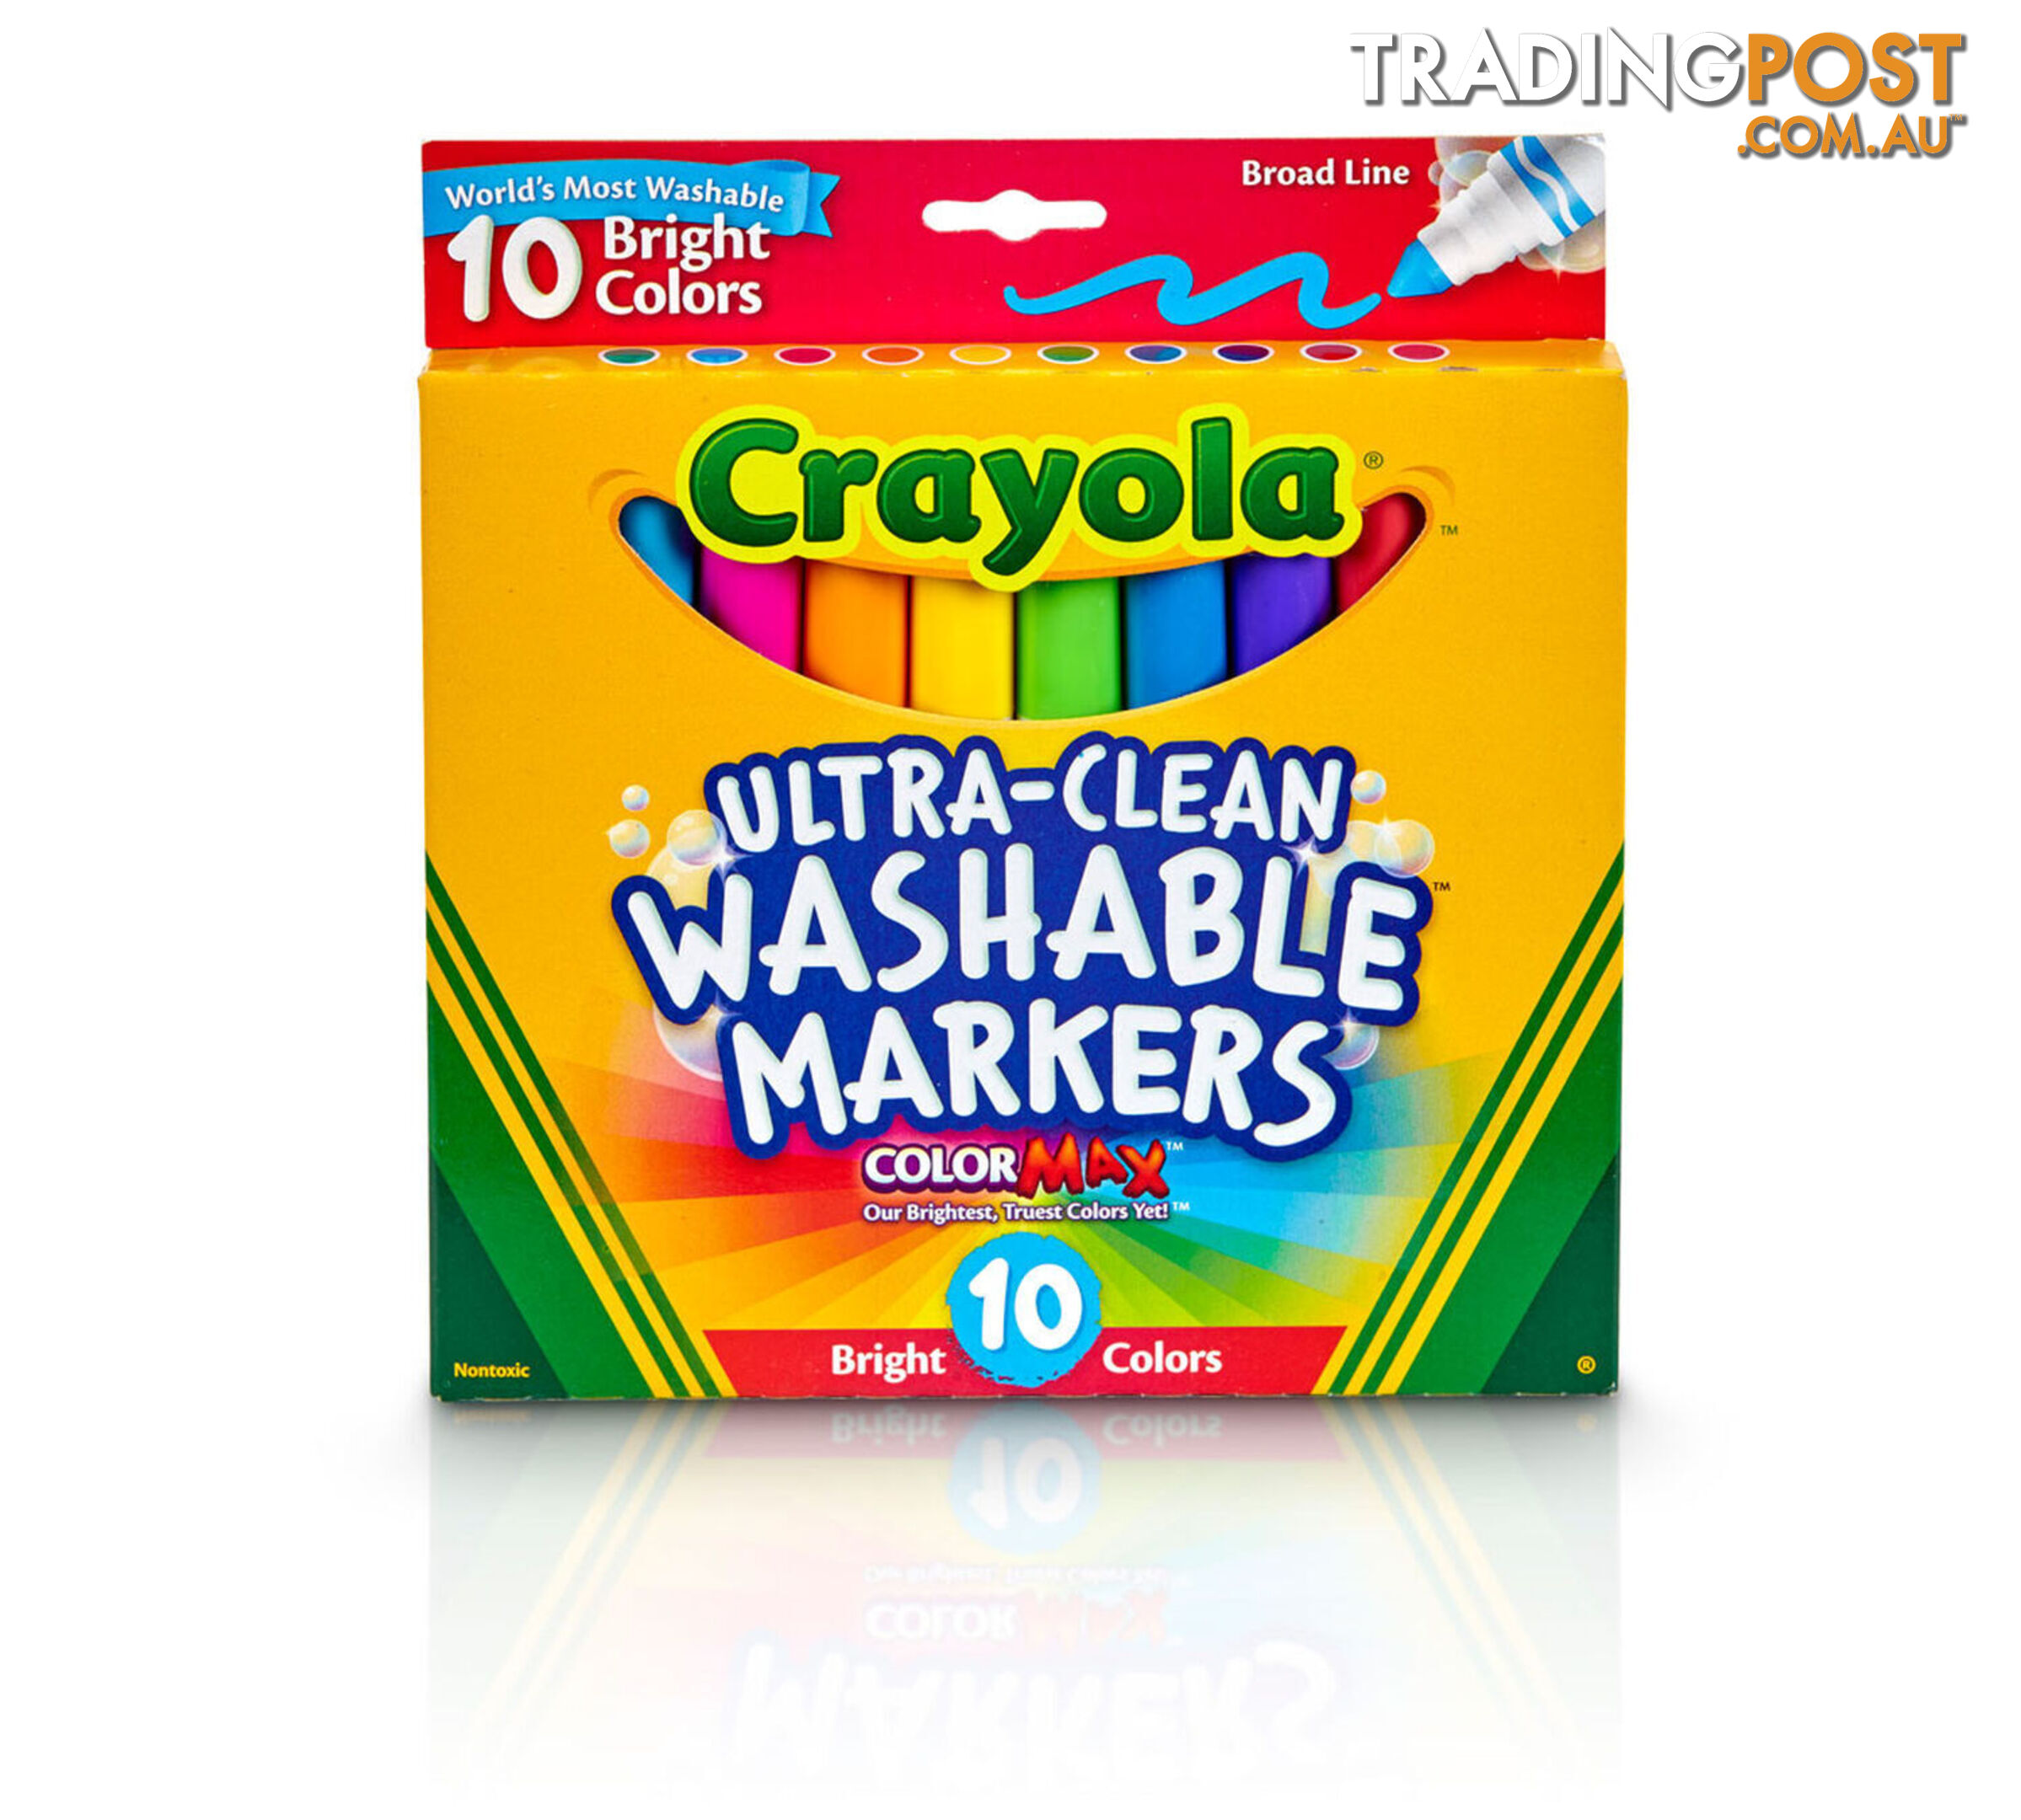 Crayola - Ultra-clean Markers Broad Line Bright 10 Count. - Bs587855 - 071662078553